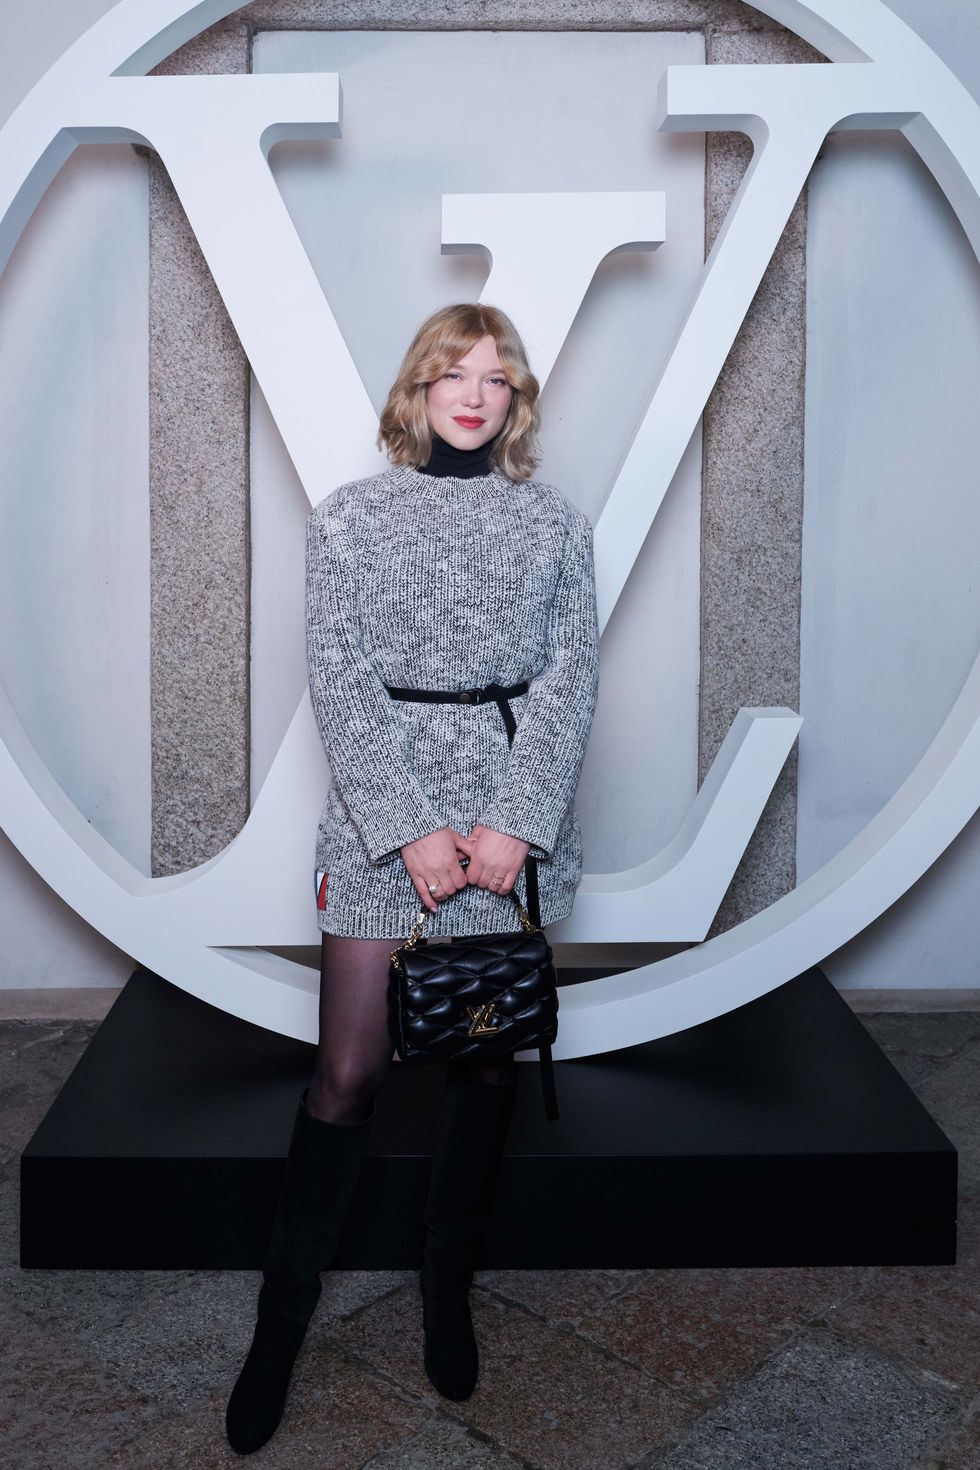 Highlights from Louis Vuitton's cruise 2024 show